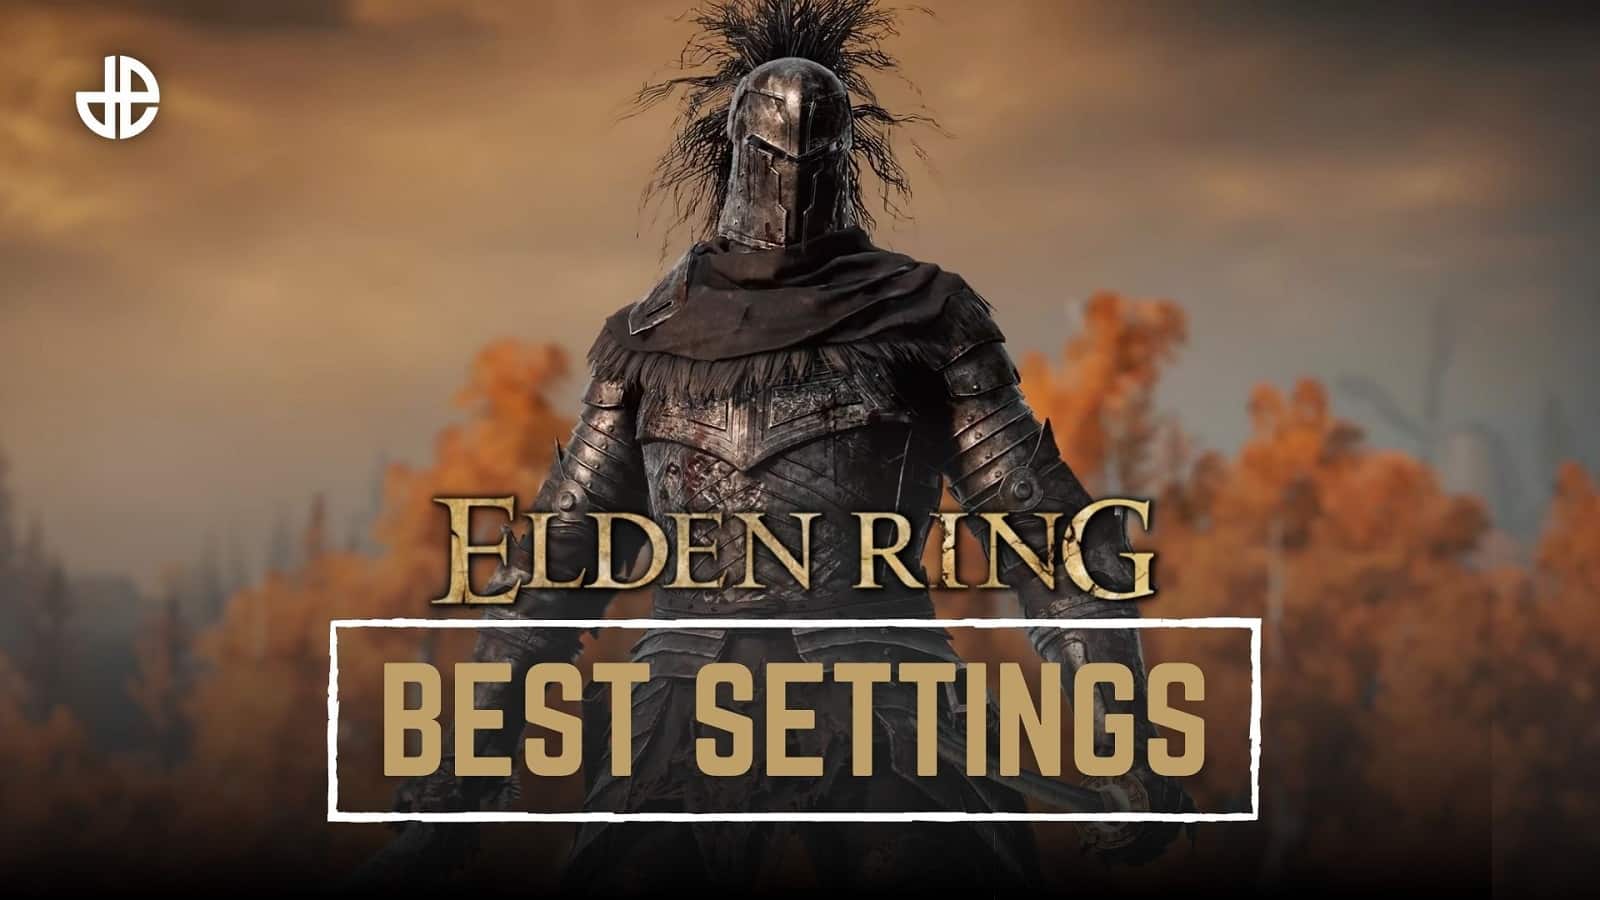 Elden Ring knight with best settings in text on the image